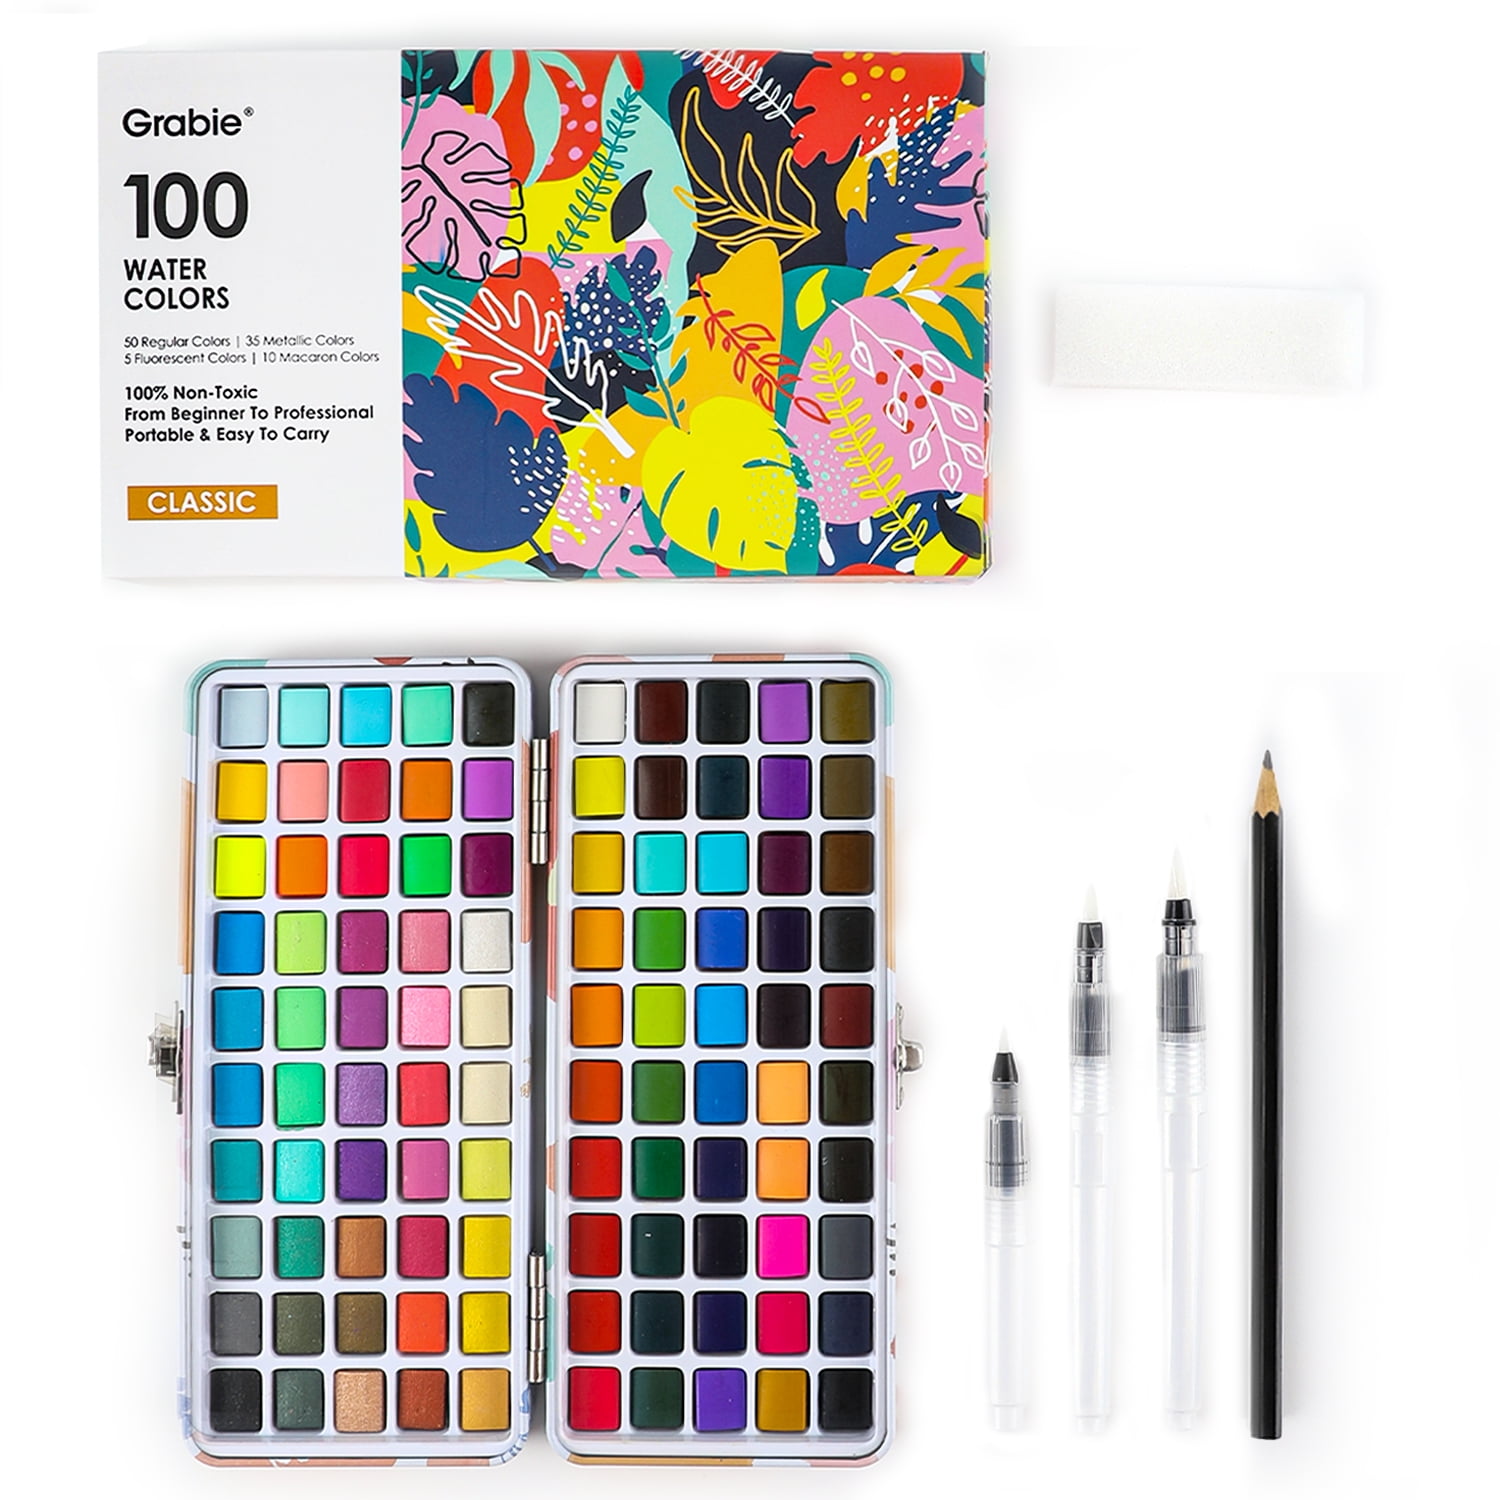 Grabie Watercolor Paint Set, 100 Colors Painting with Water Brush Pens and  Drawing Pencil, Great for Kids and Adults, Art Supplies, Perfect Starter